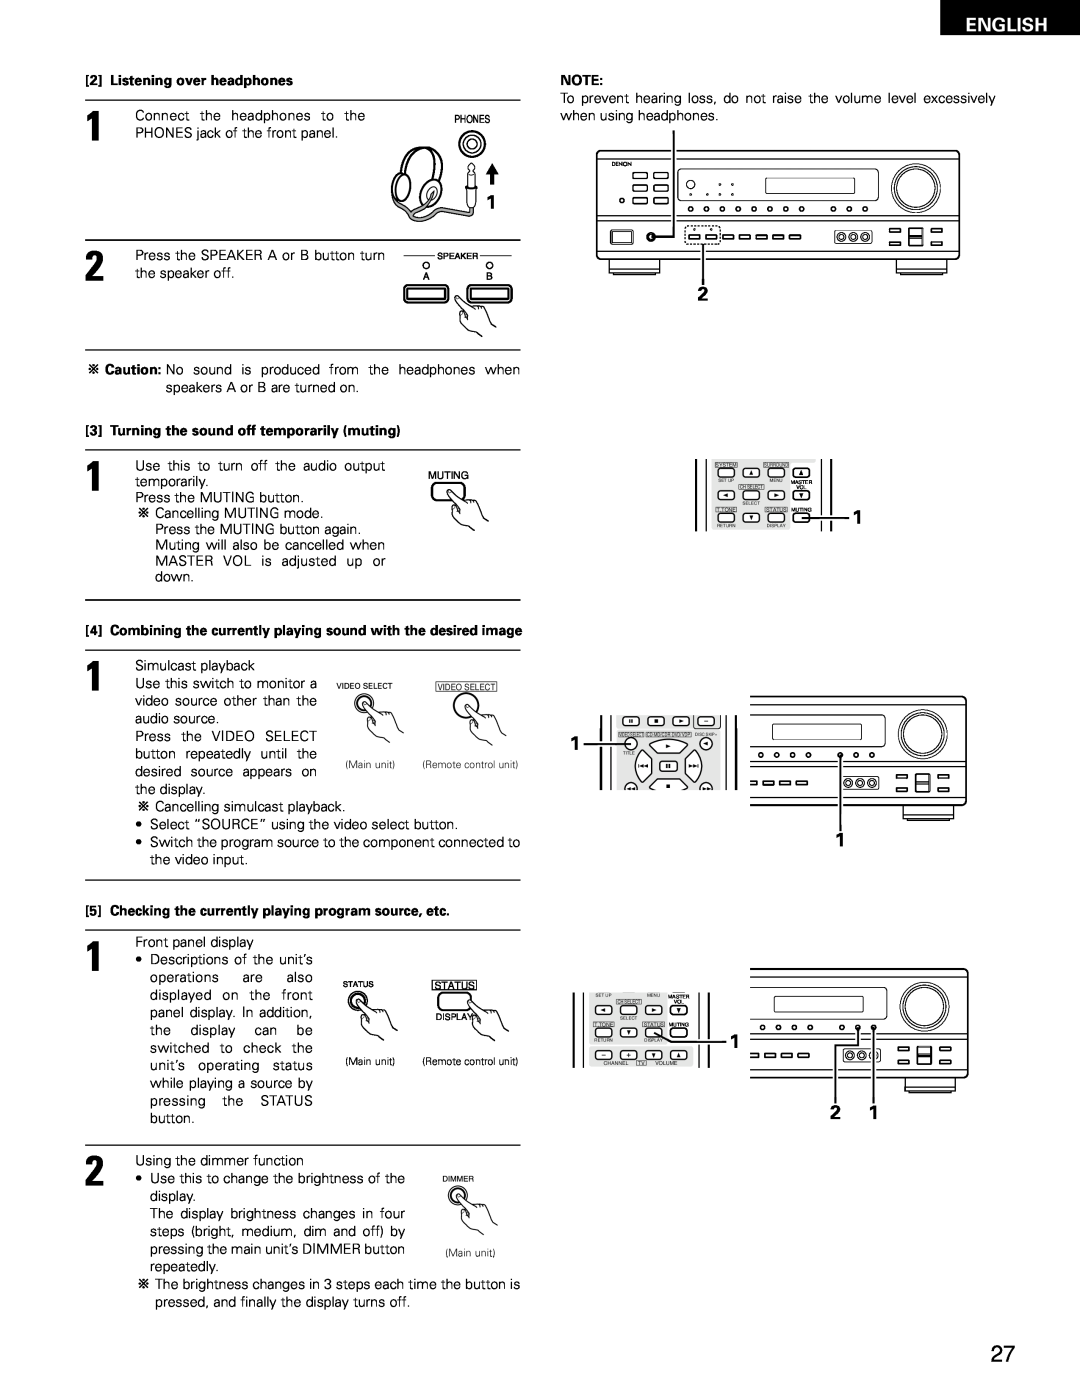 Denon AVR-1403, 483 manual English, Listening over headphones, Turning the sound off temporarily muting 